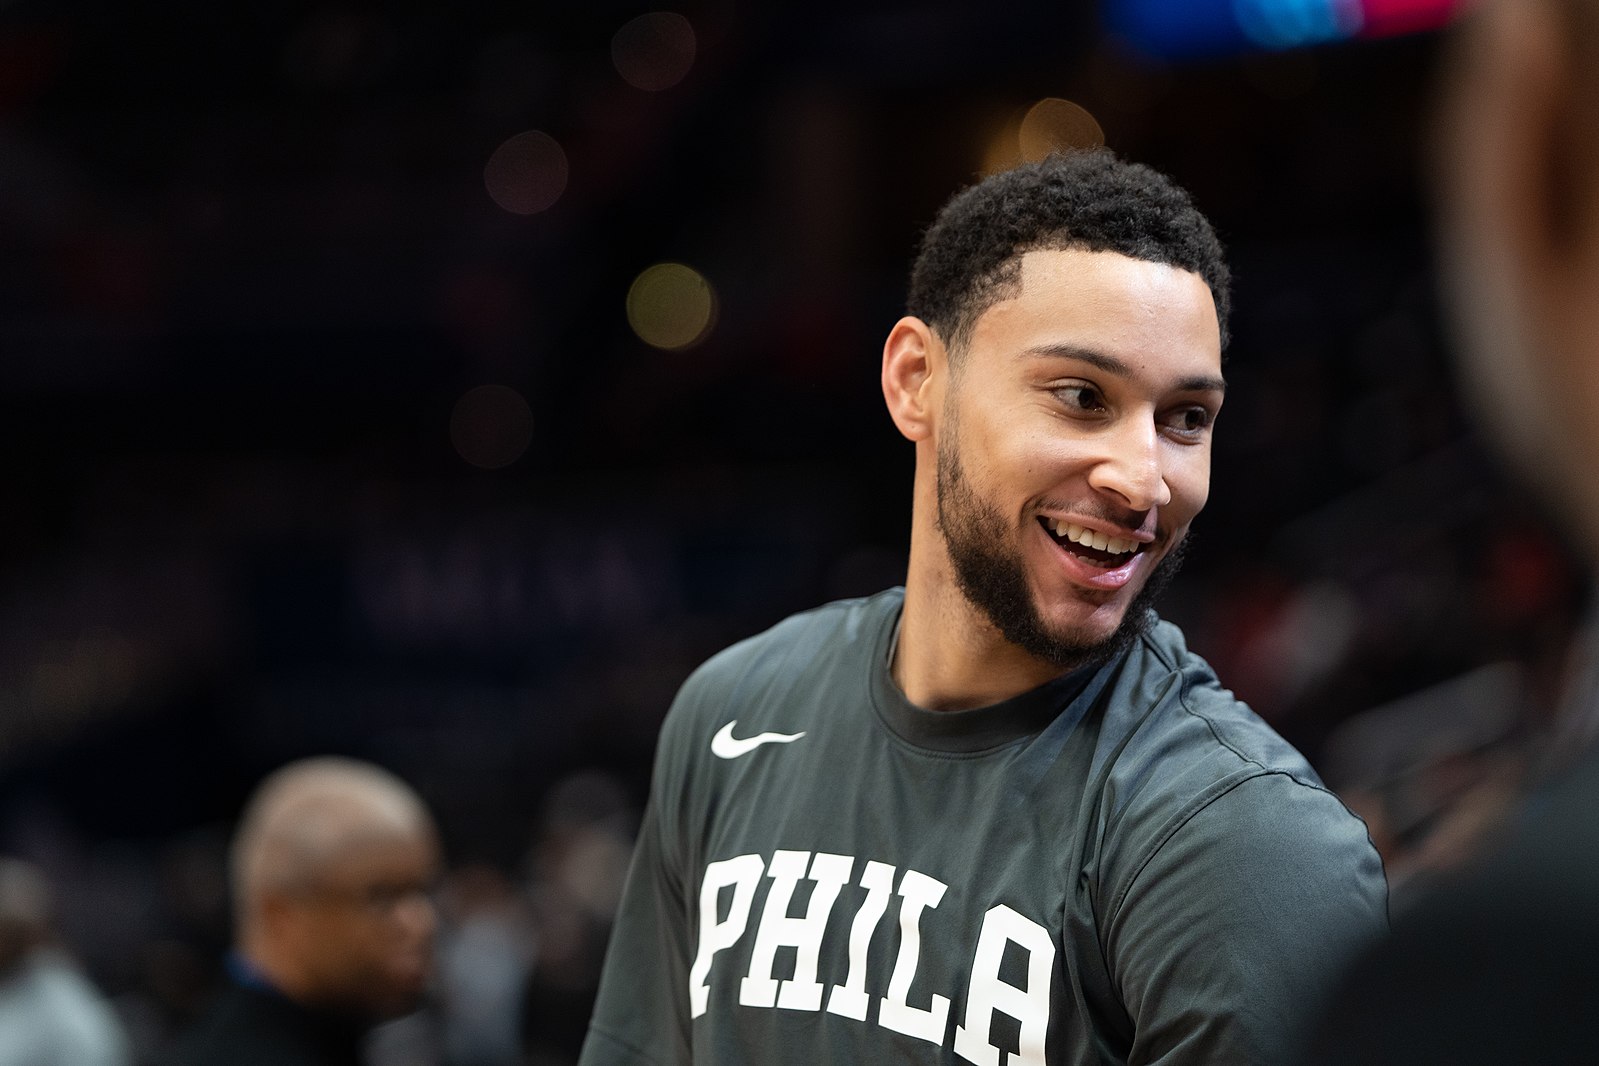 Will the real Ben Simmons please stand up?